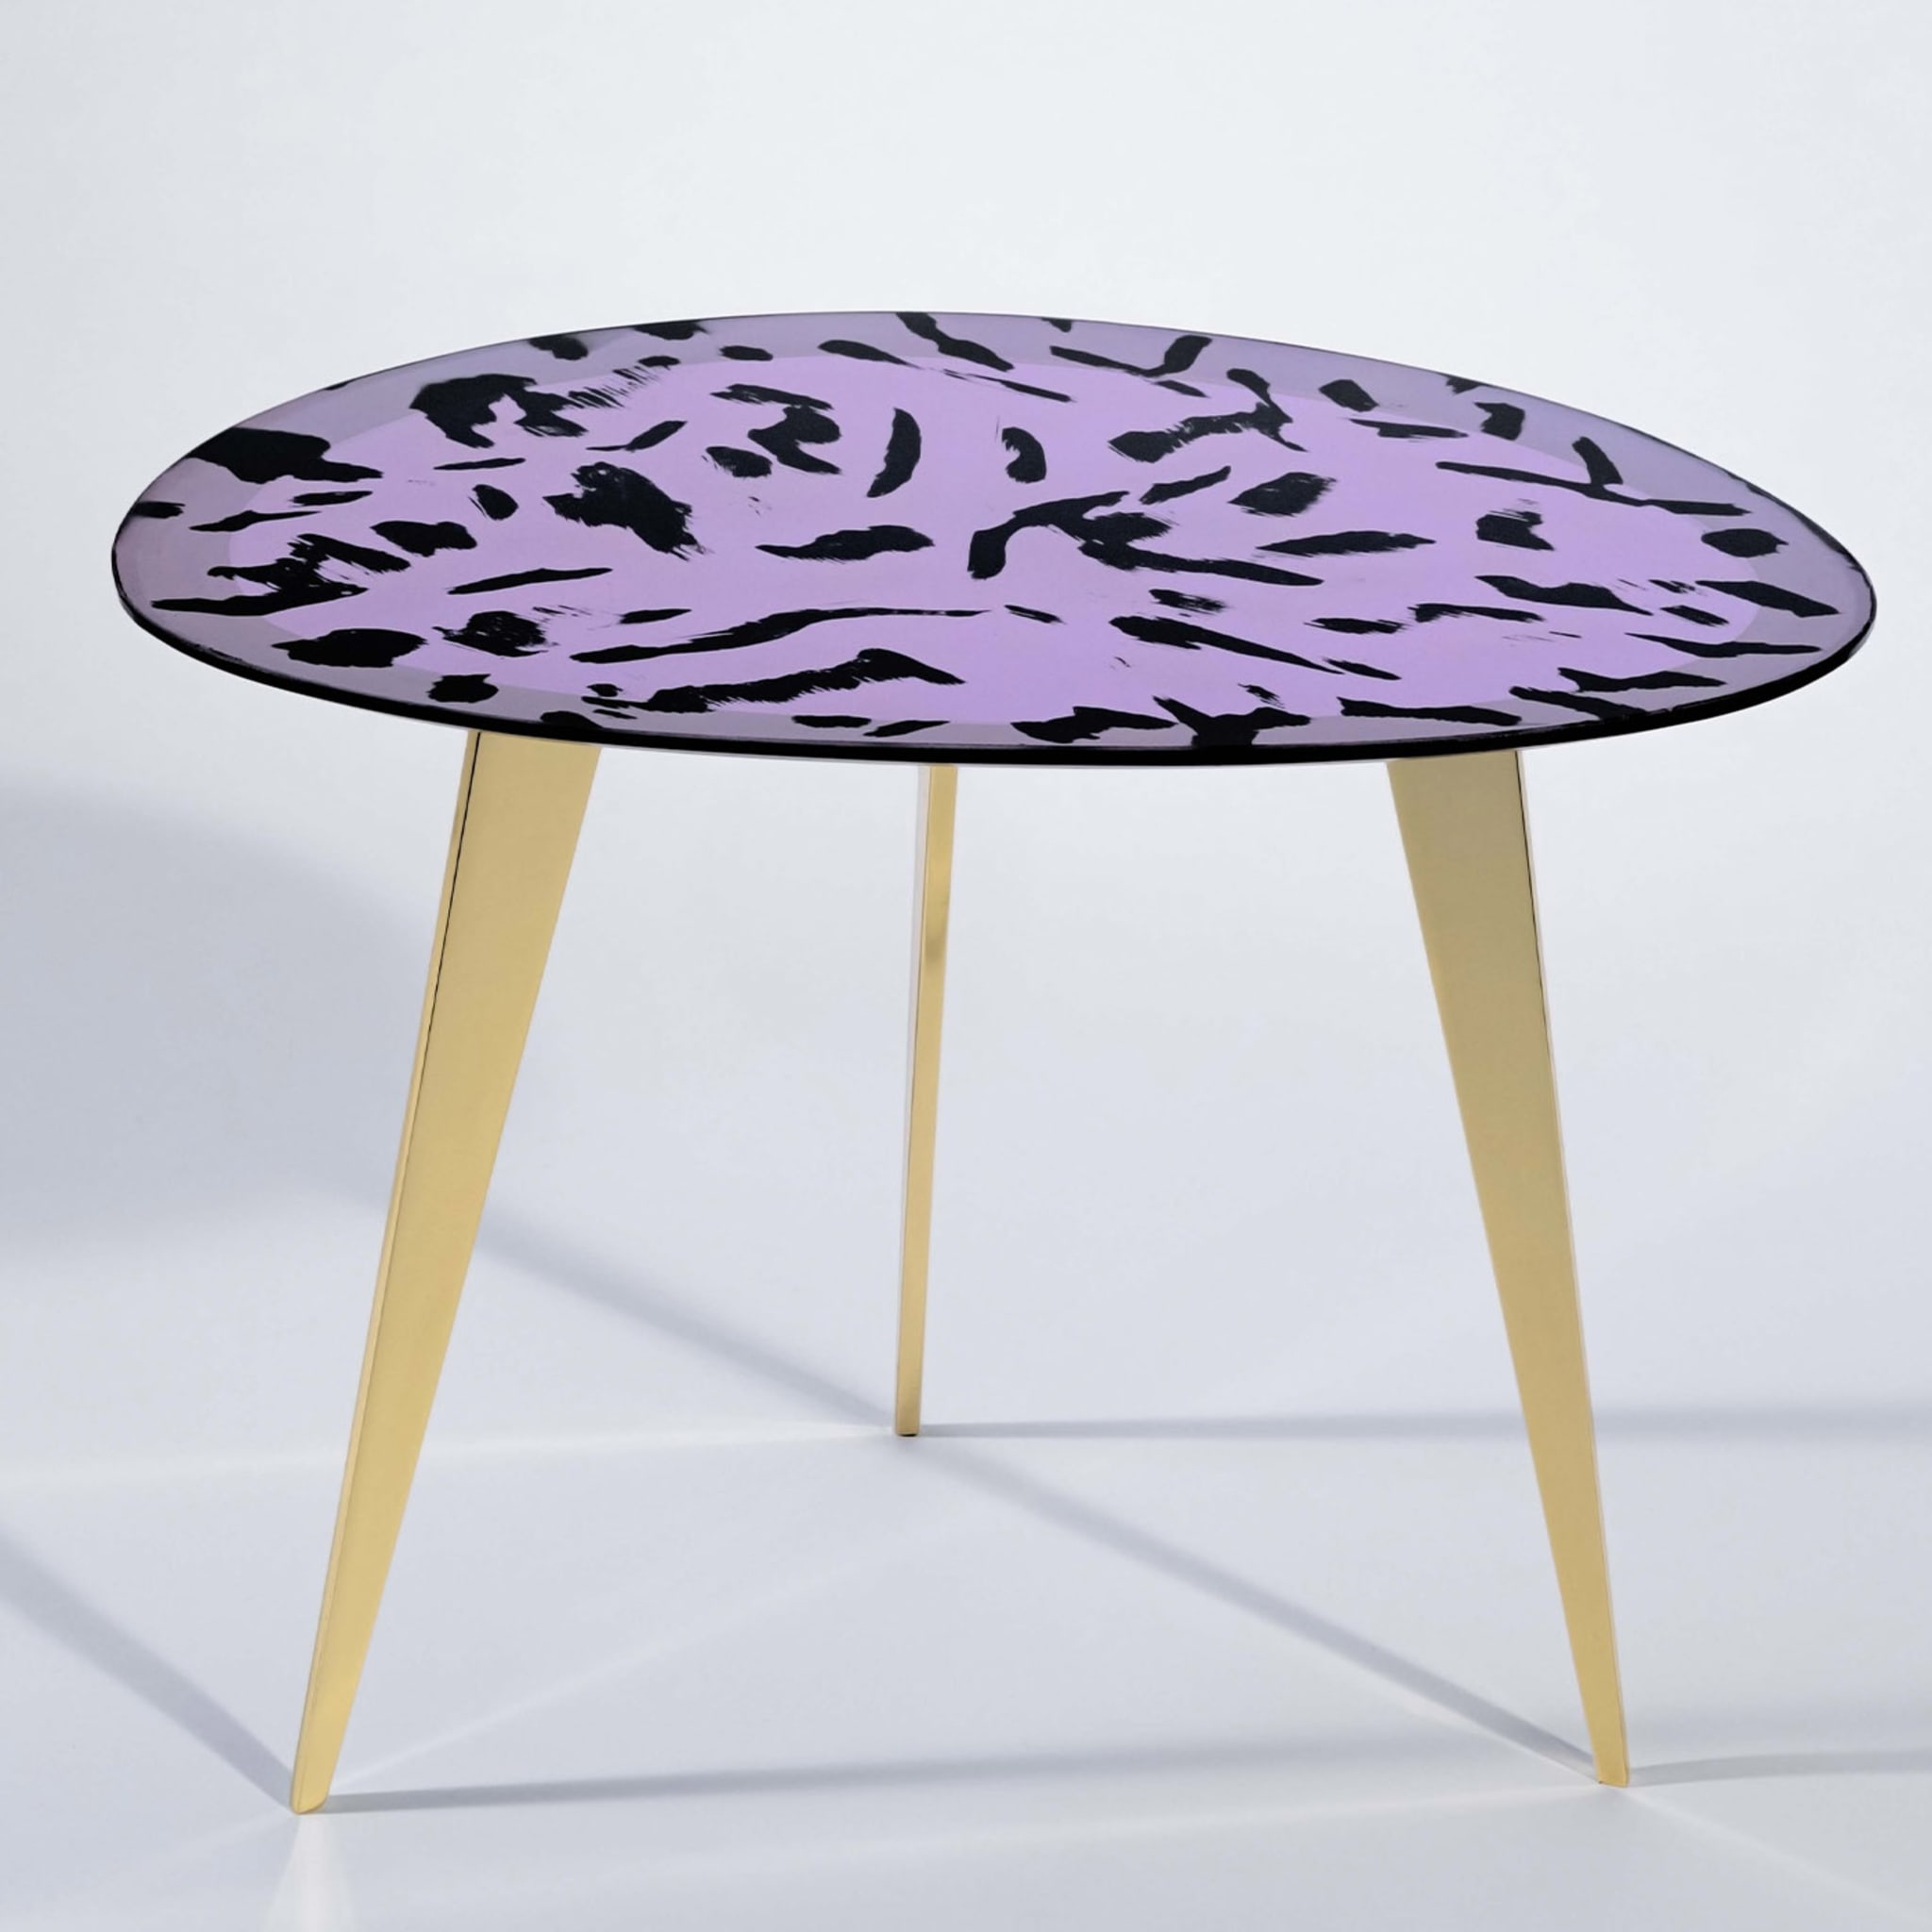 Puá Iridescent Pink Coffee Table - Alternative view 3